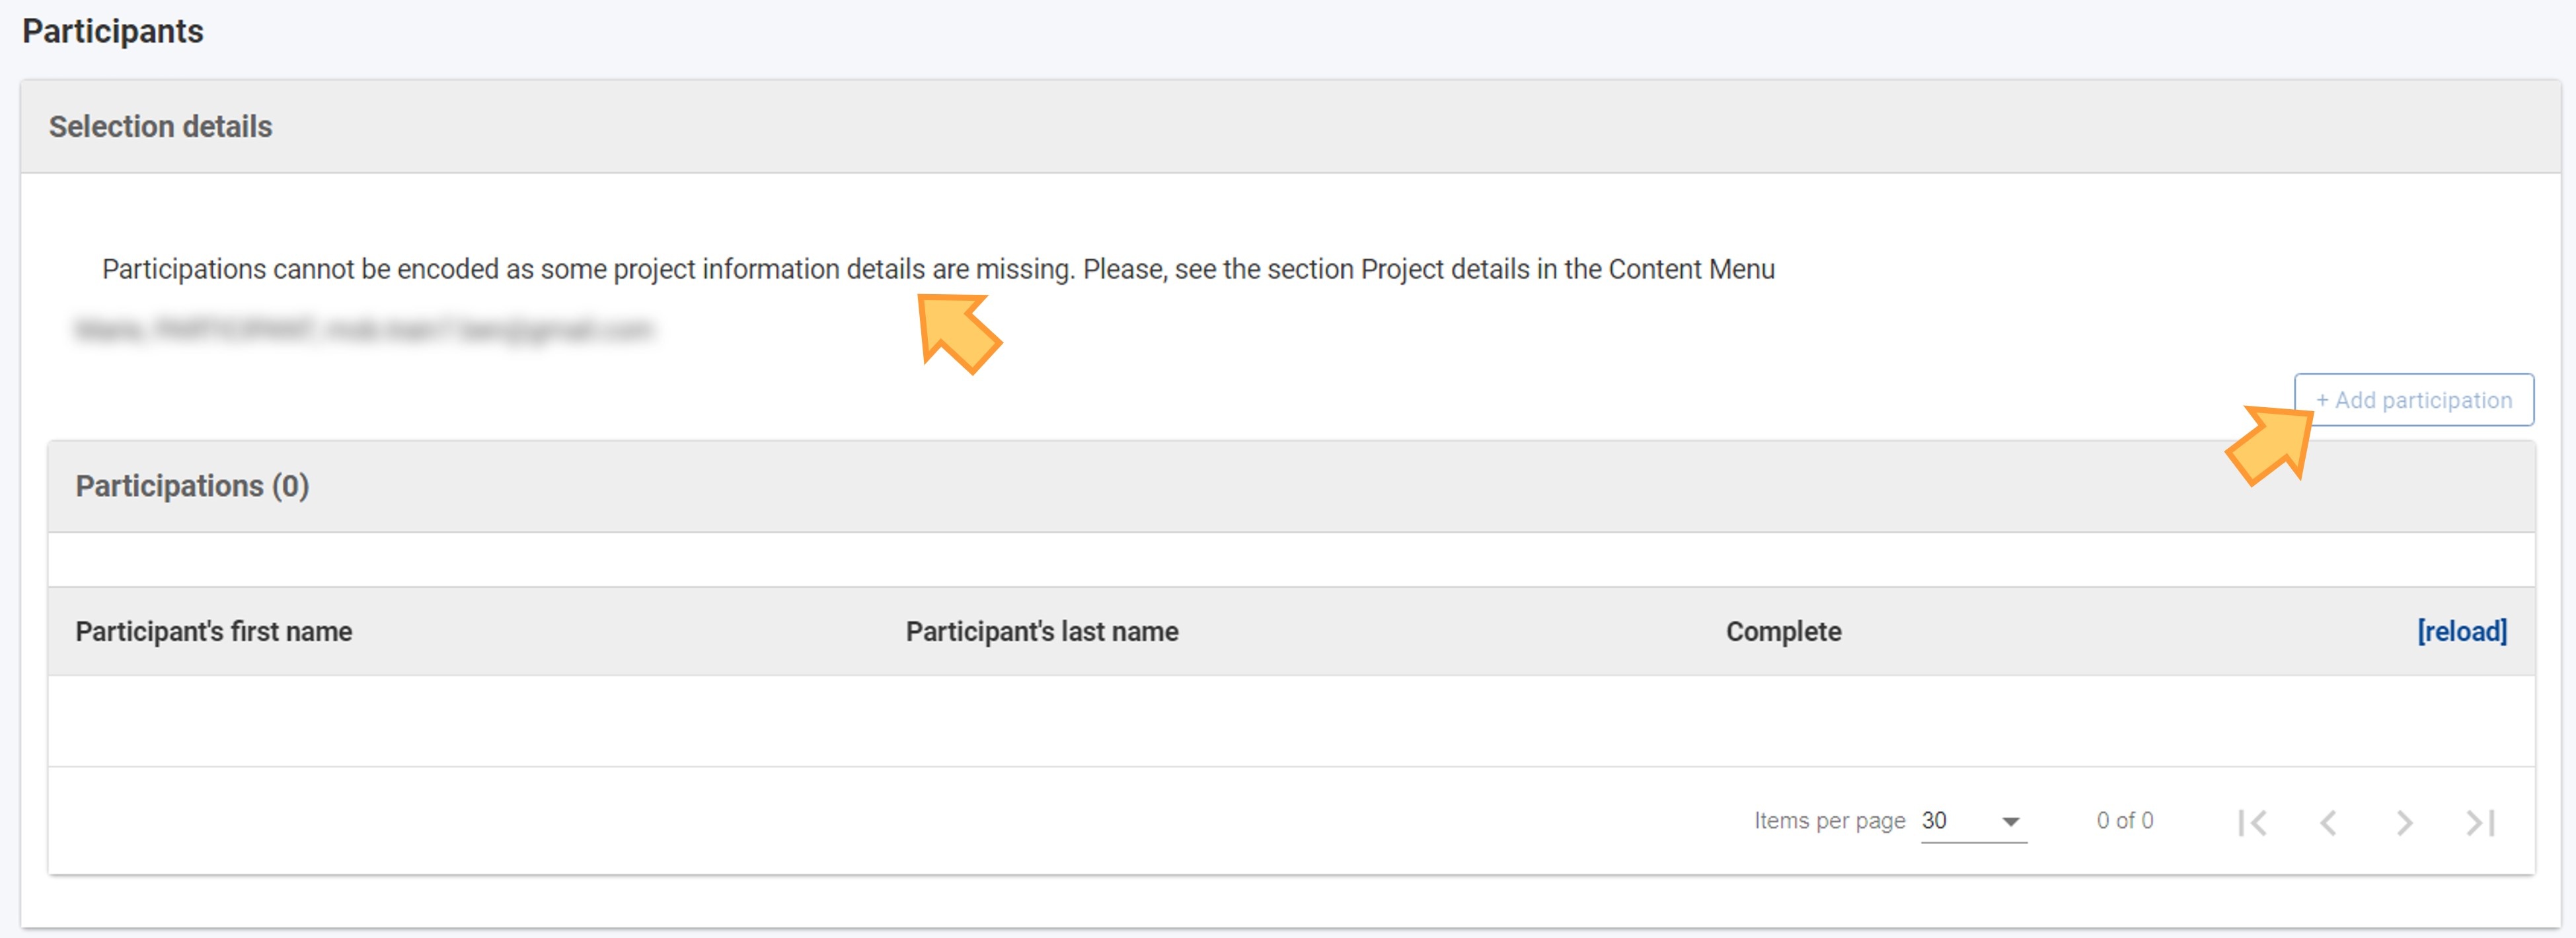 Not possible to add a participation if the Project details are not updated